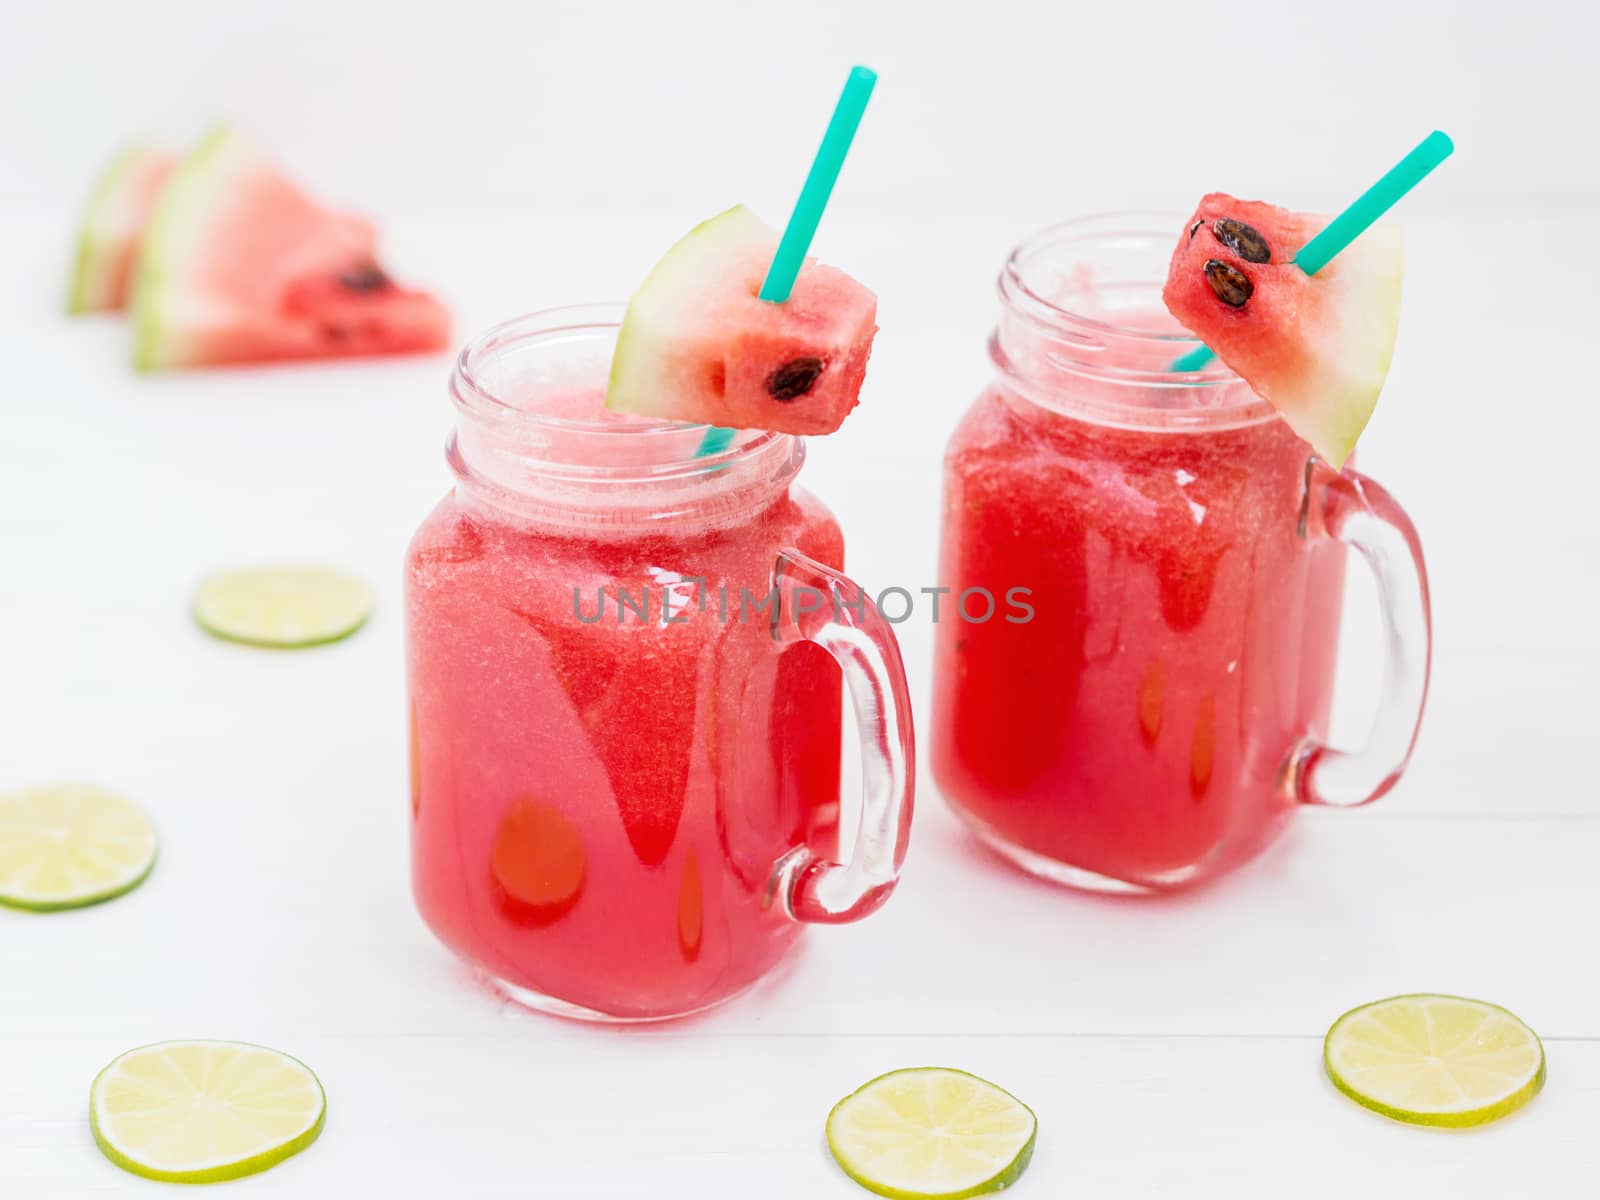 Watermelon smothie and slices on white wooden background